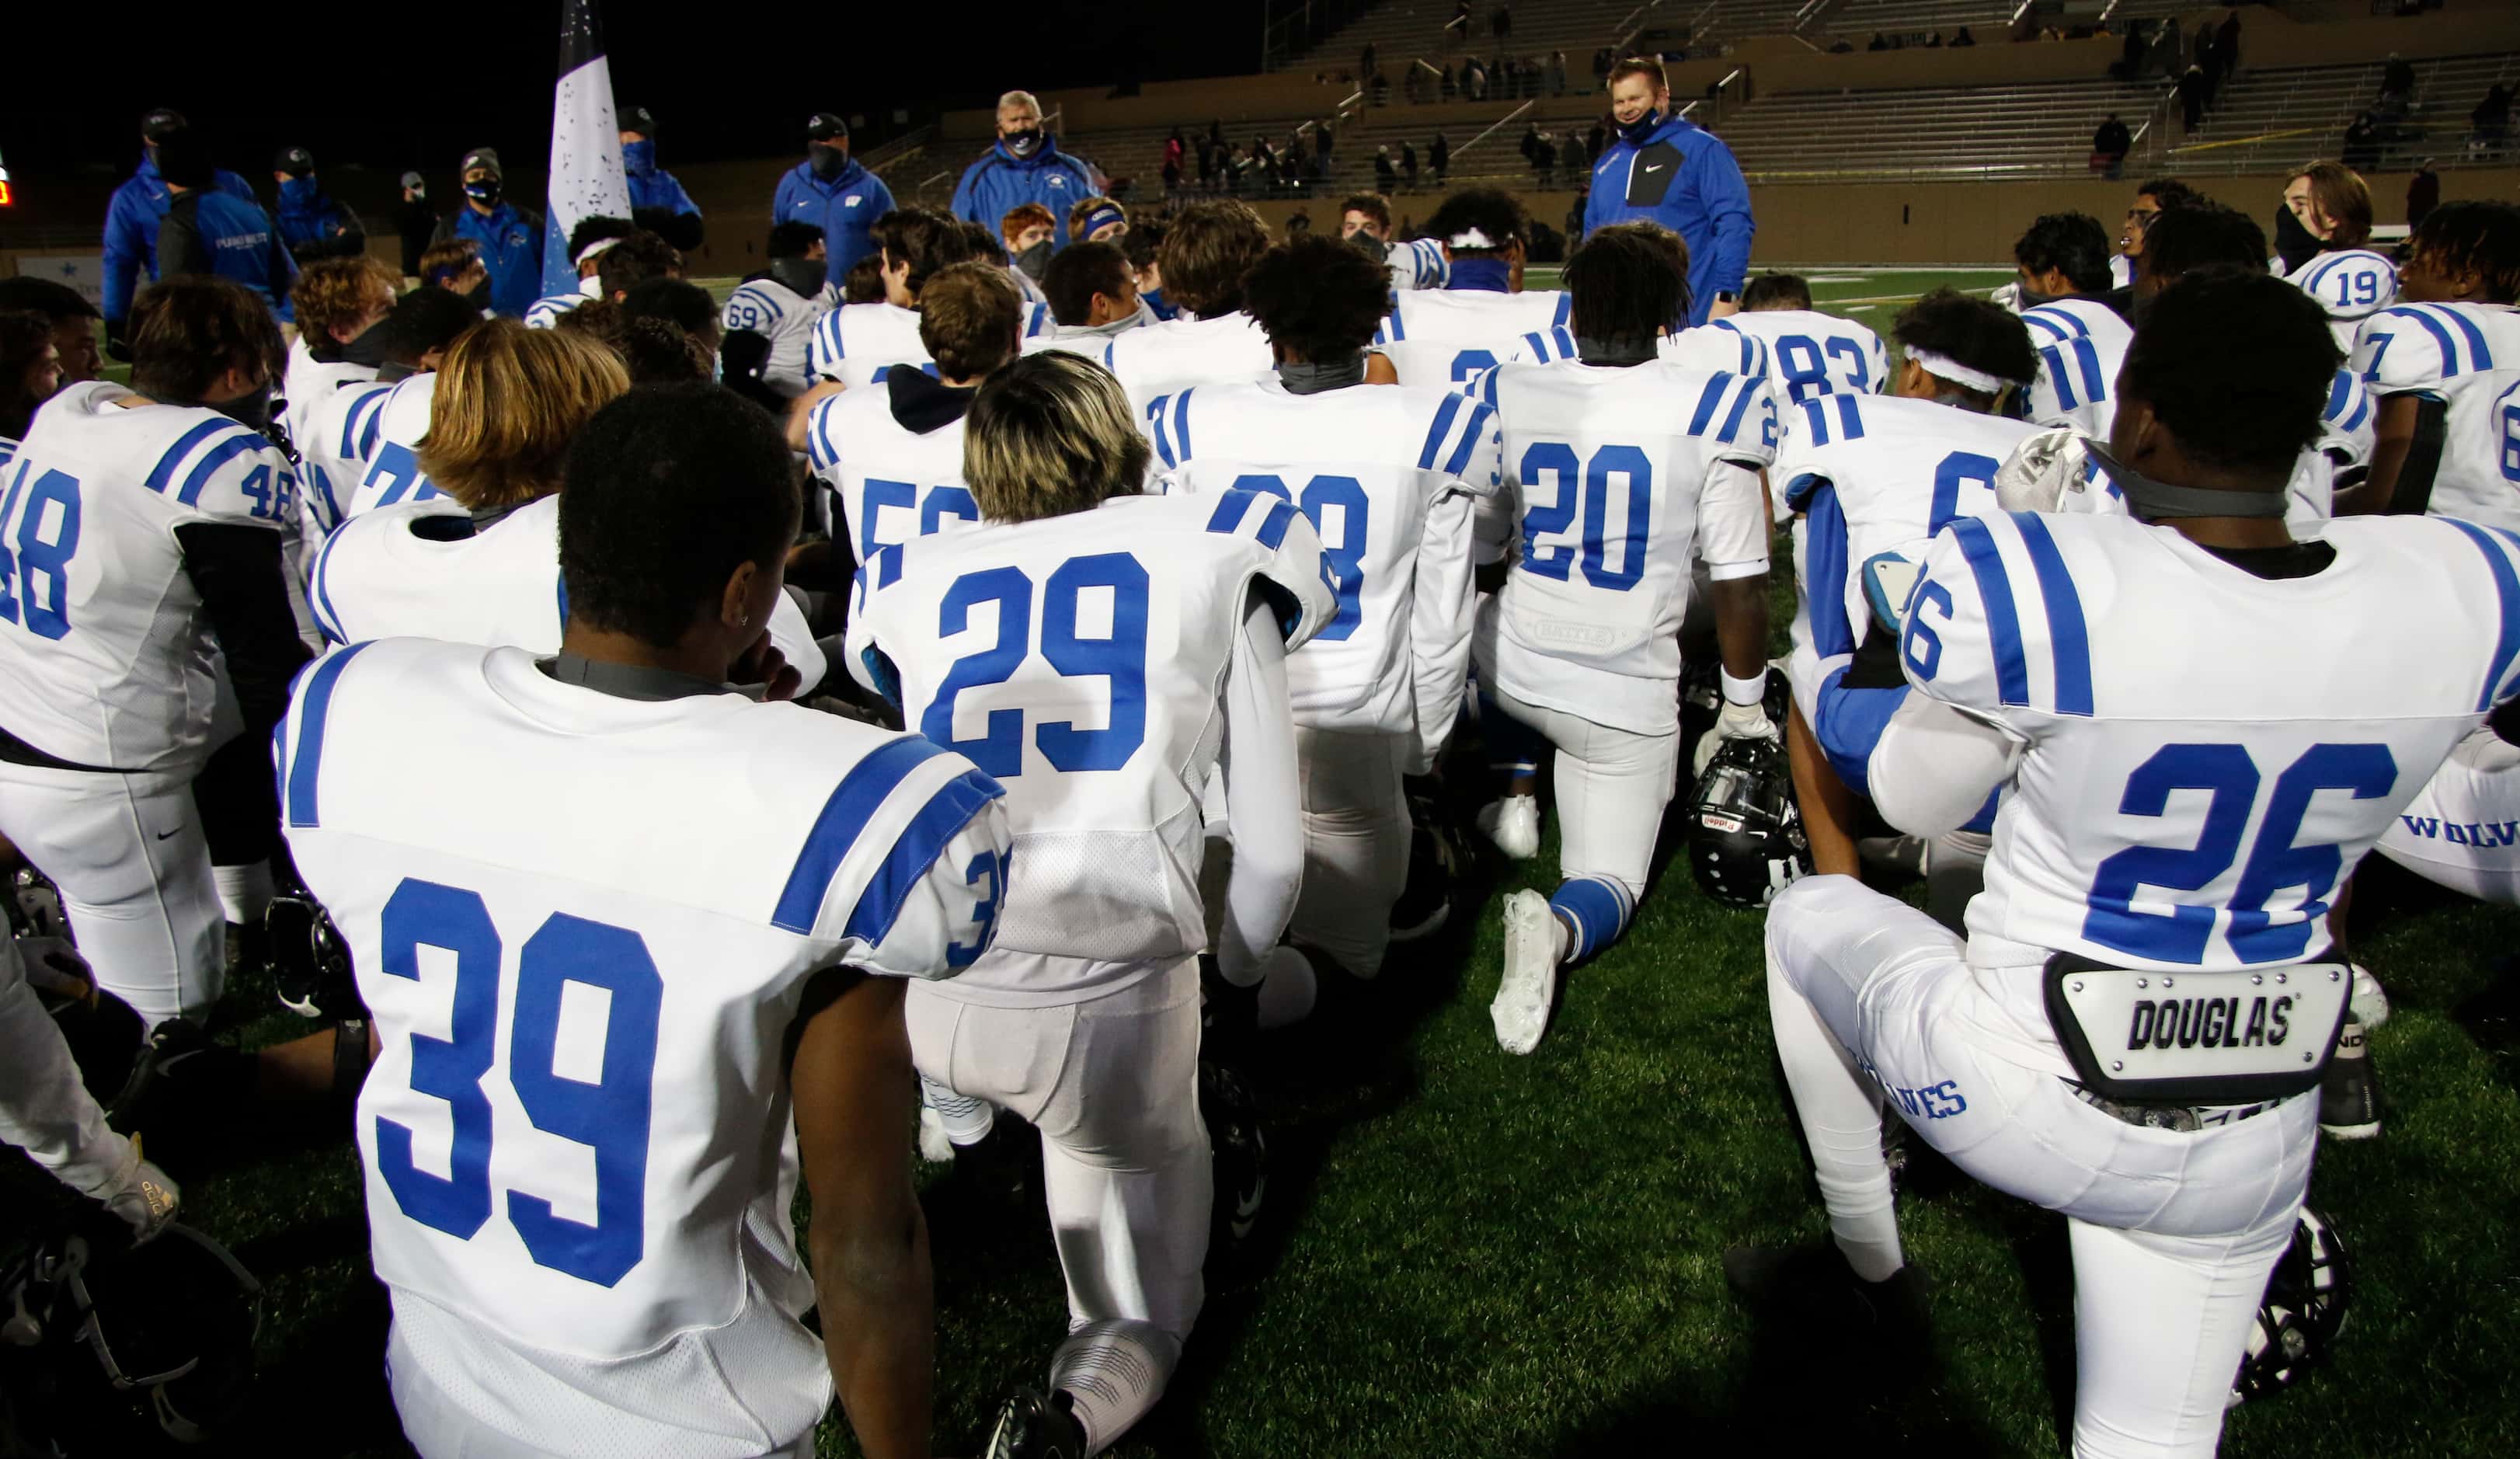 Plano West head coach Tyler Soukup had a hard time hiding his enthusiasm as he was unable to...